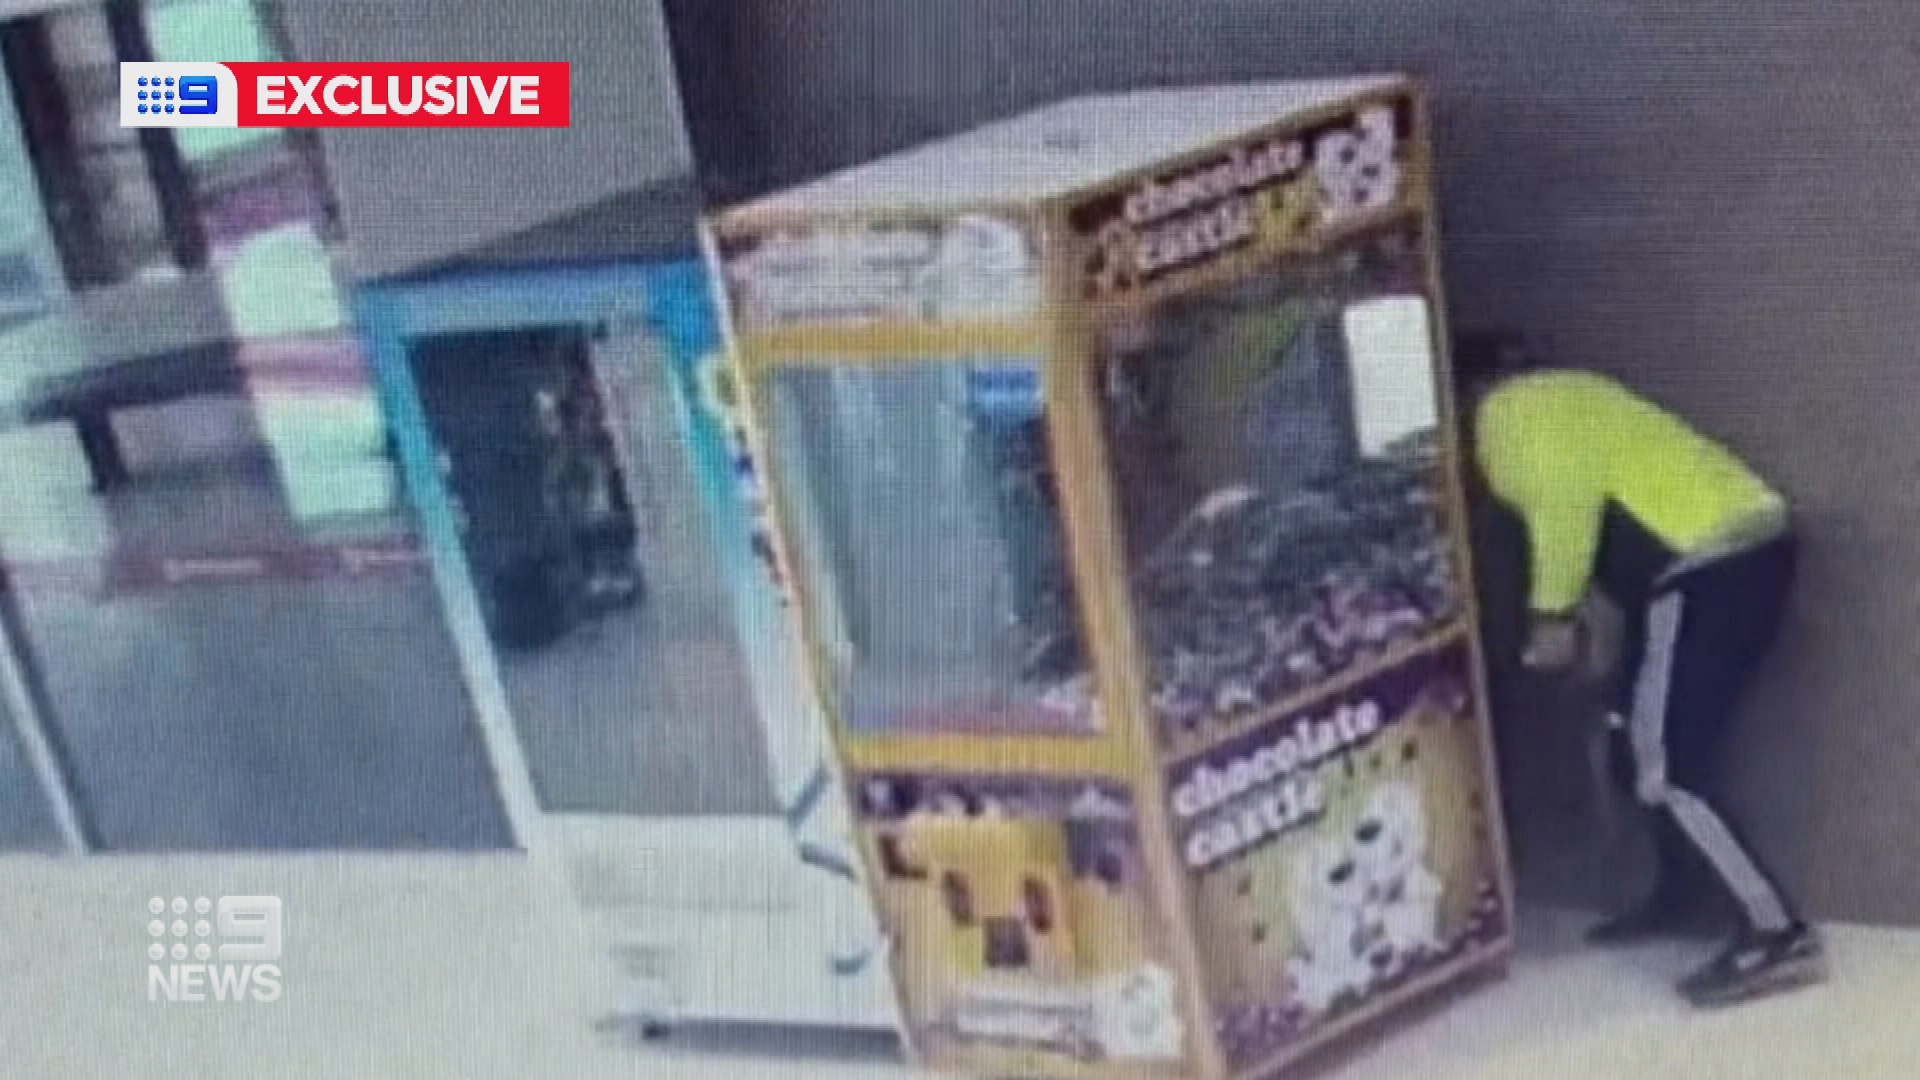 Adelaide man accused of stealing skill tester machines flees court.